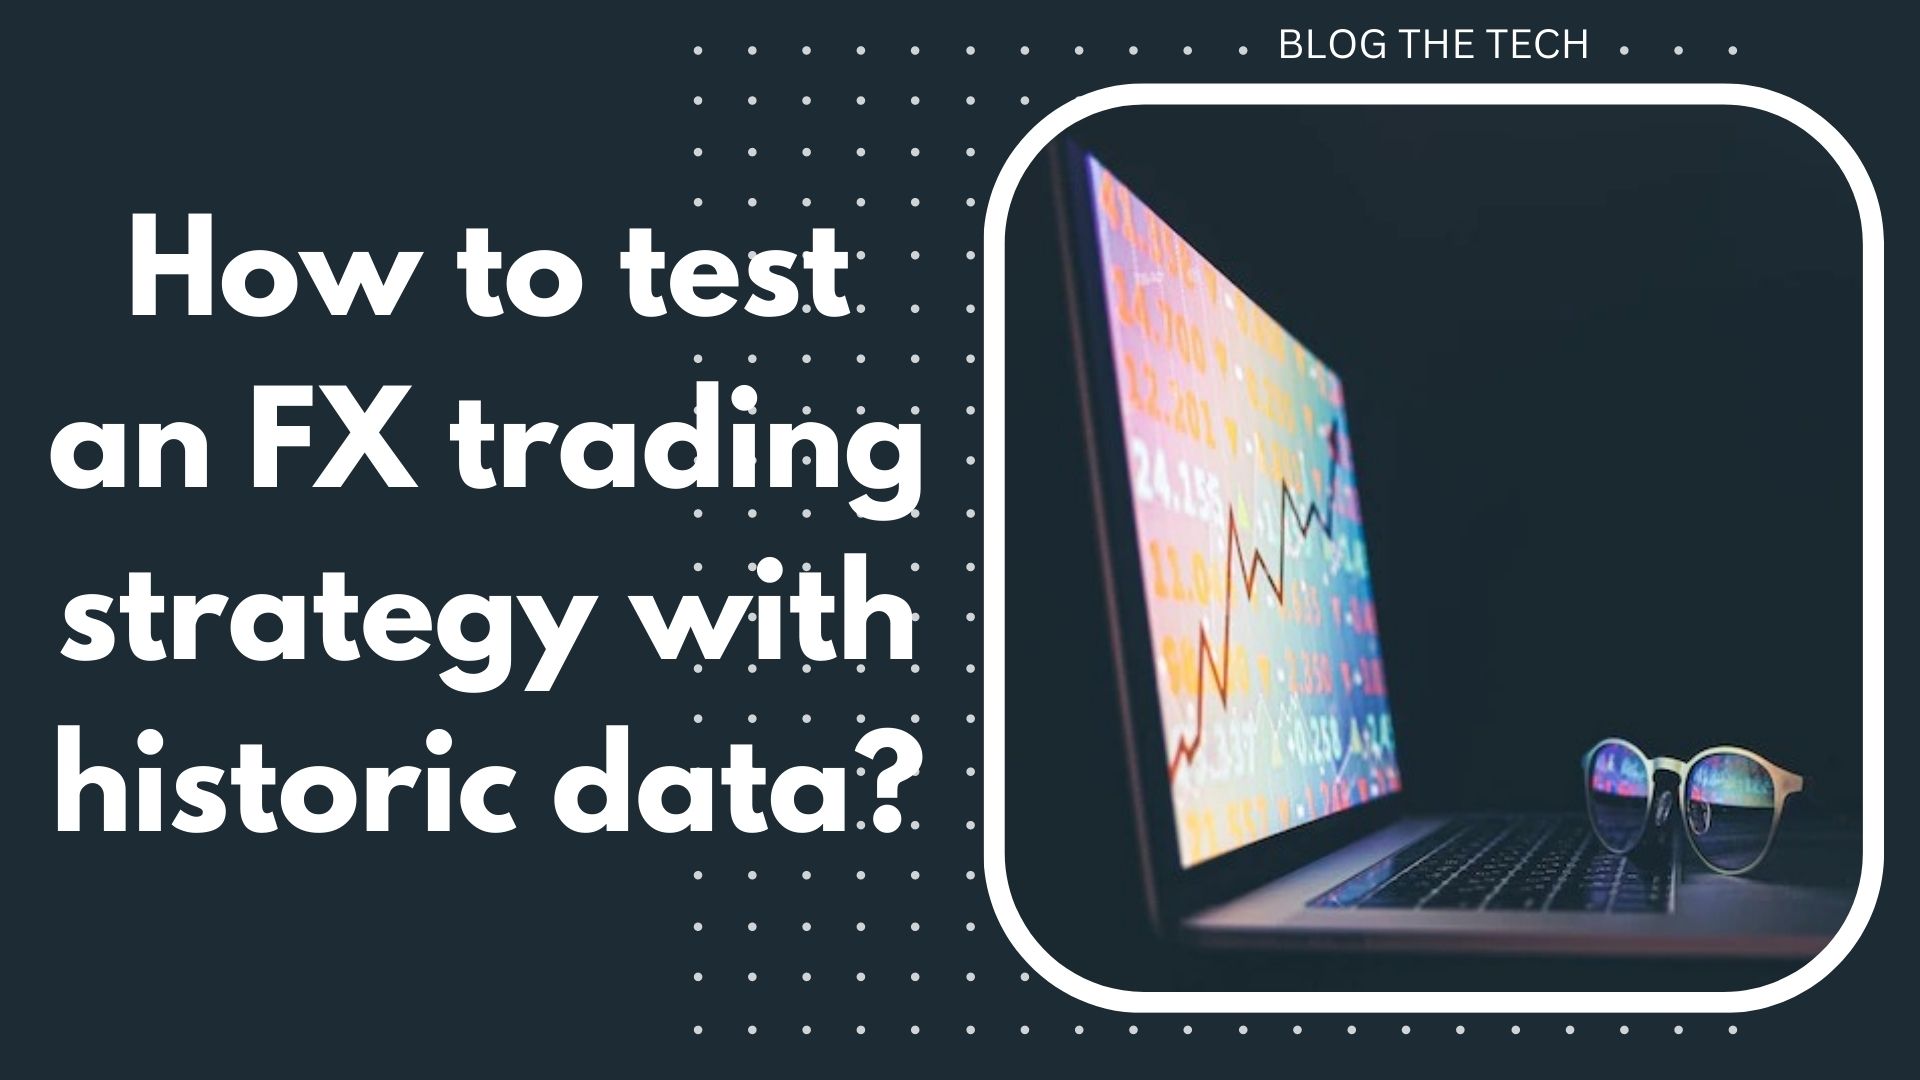 How to test an FX trading strategy with historic data?